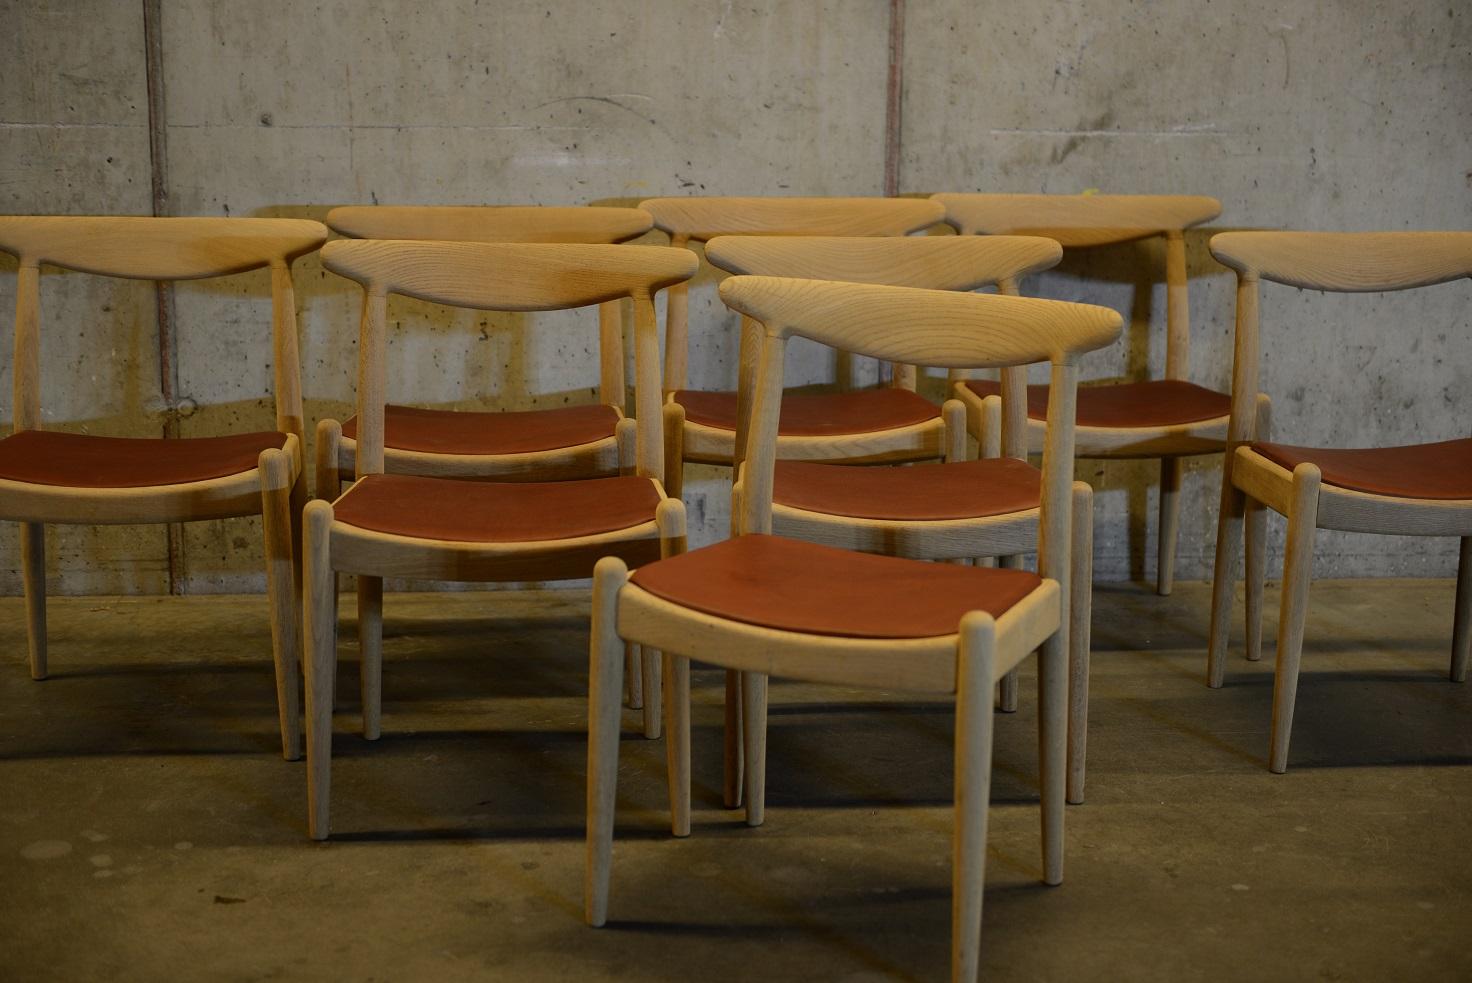 Set of 8 dining chairs in soaped oakwood with new leather seats. Newly re-upholstered with the finest cognac coloured leather from the Swedish Tärnsjö tannery. The chairs were designed by Danish designer Hans J. Wegner in the early 1950s. Produced